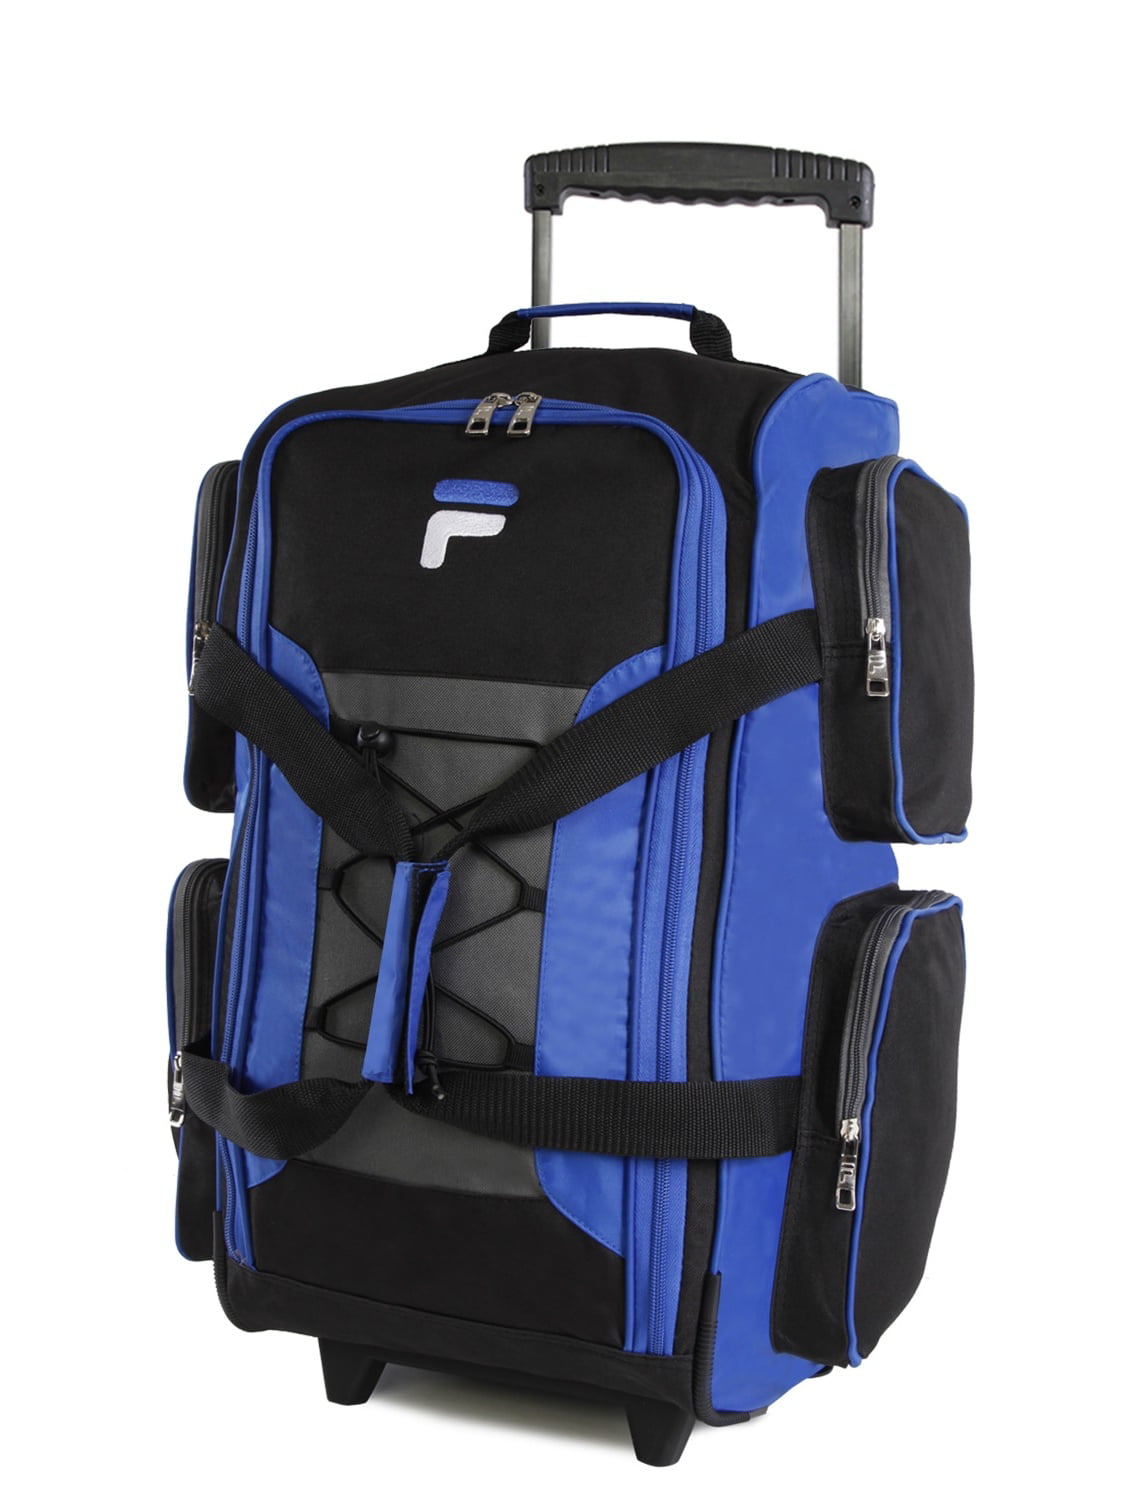 carry on travel bags walmart